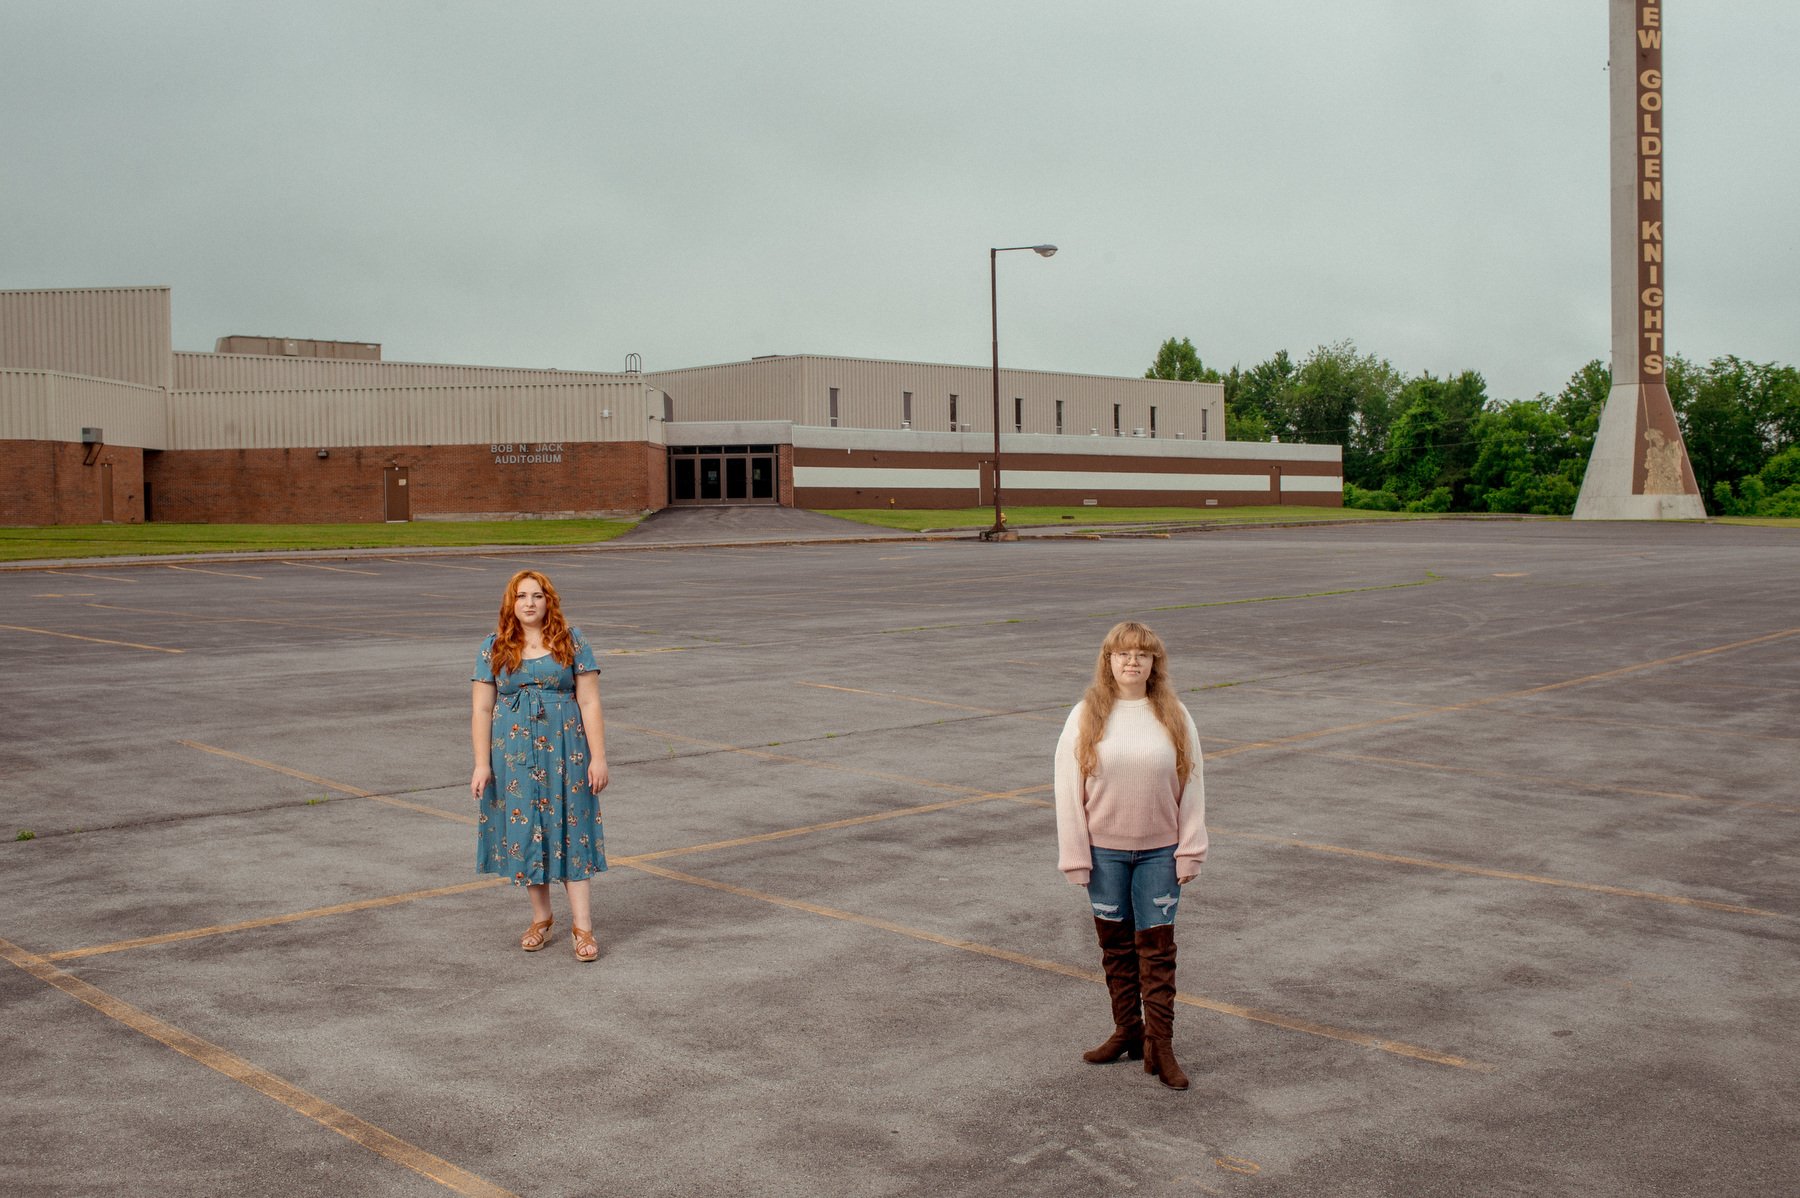 Lillian and Shania for The New York Times - A Fading Coal County Bets on Schools 